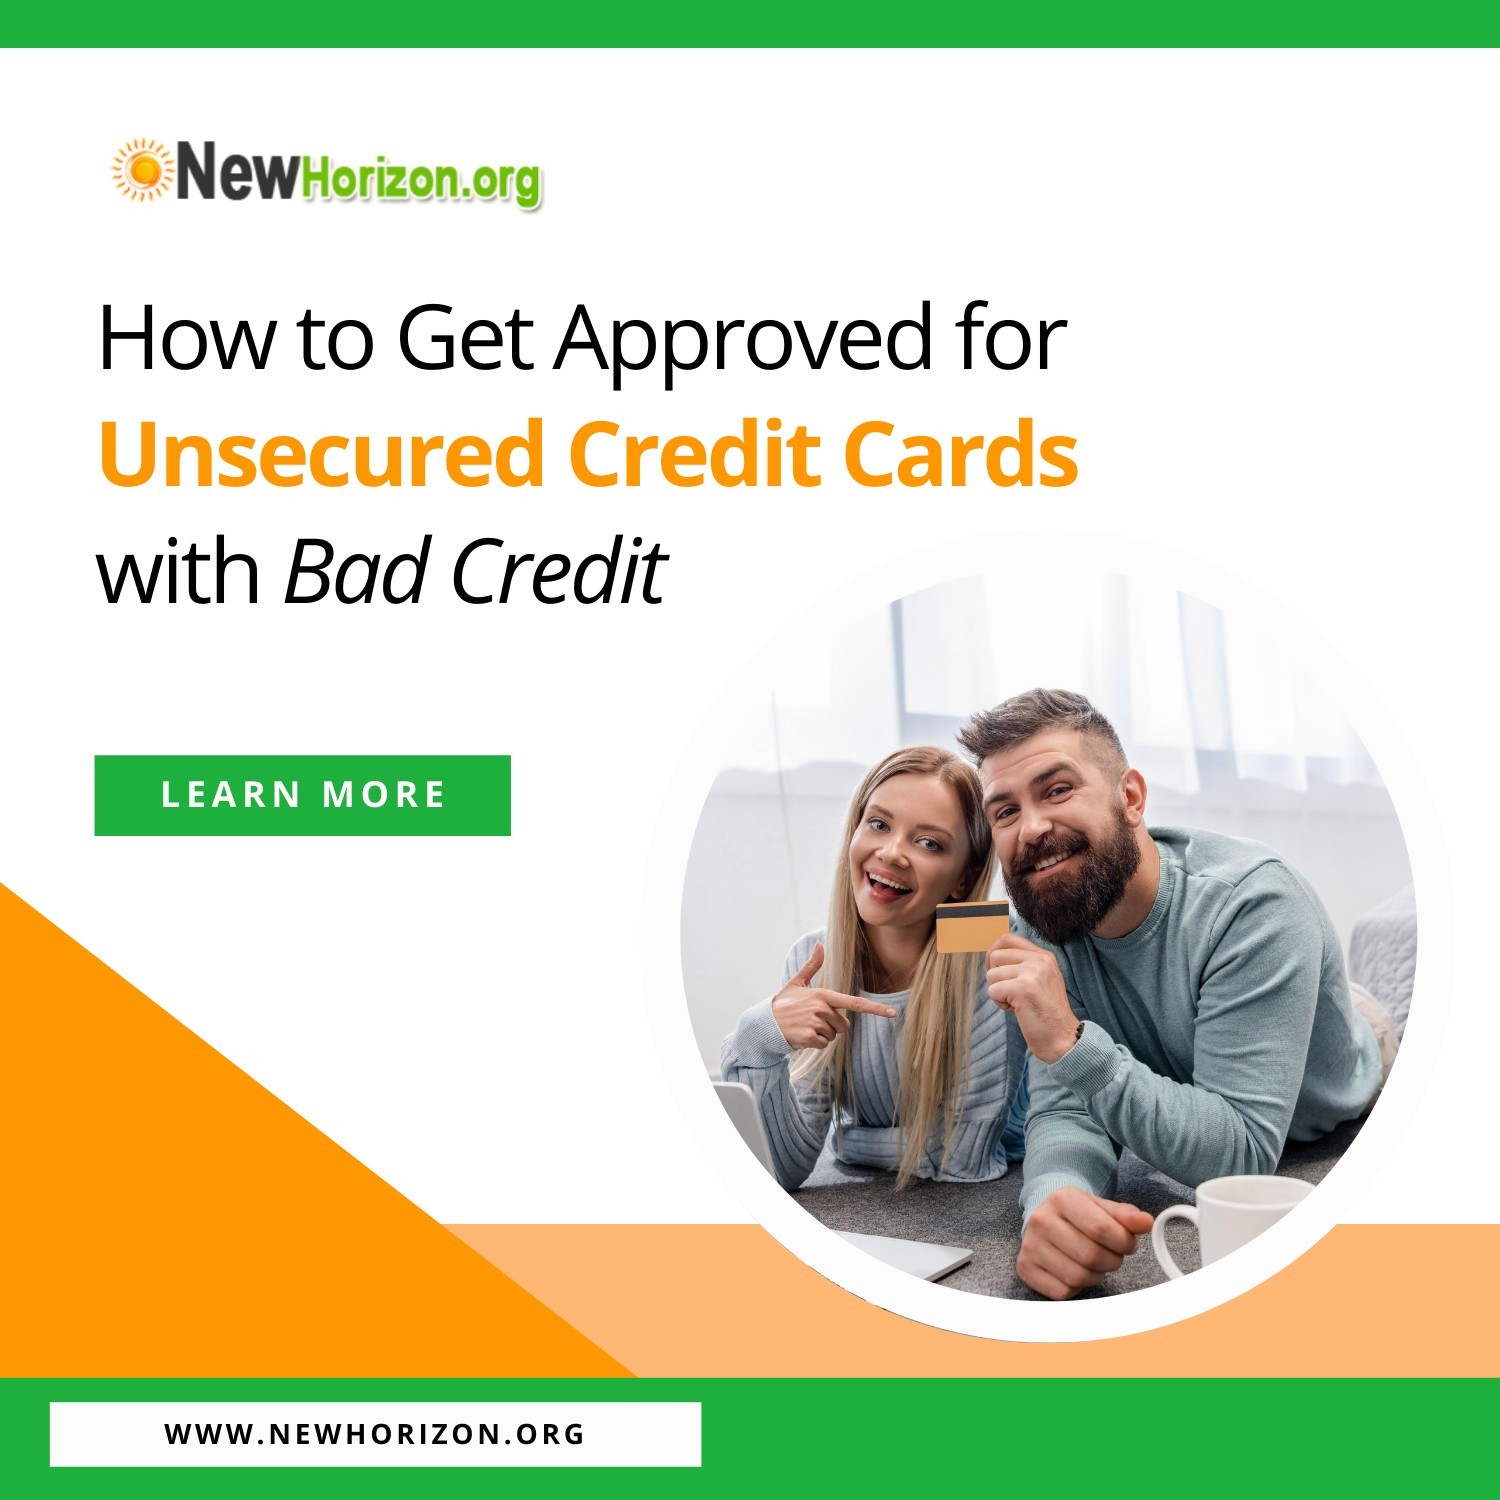 How To Get Approved for Unsecured Credit Cards with Bad Credit